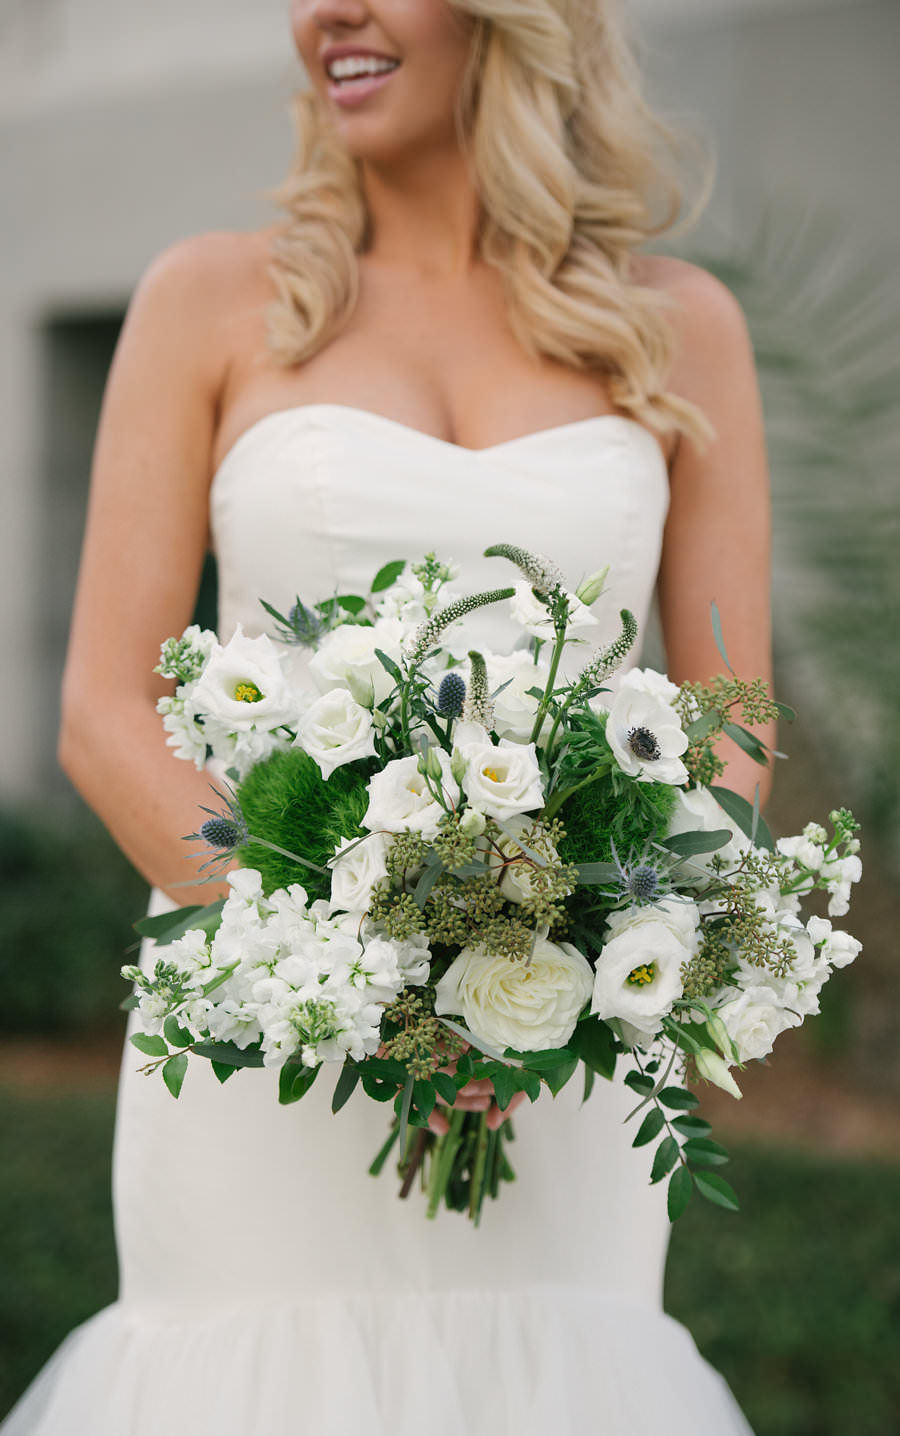 Tampa Bridal Wedding Portrait in Ivory, Strapless Hayley Paige Wedding Dress and Green and White Floral Bouquet